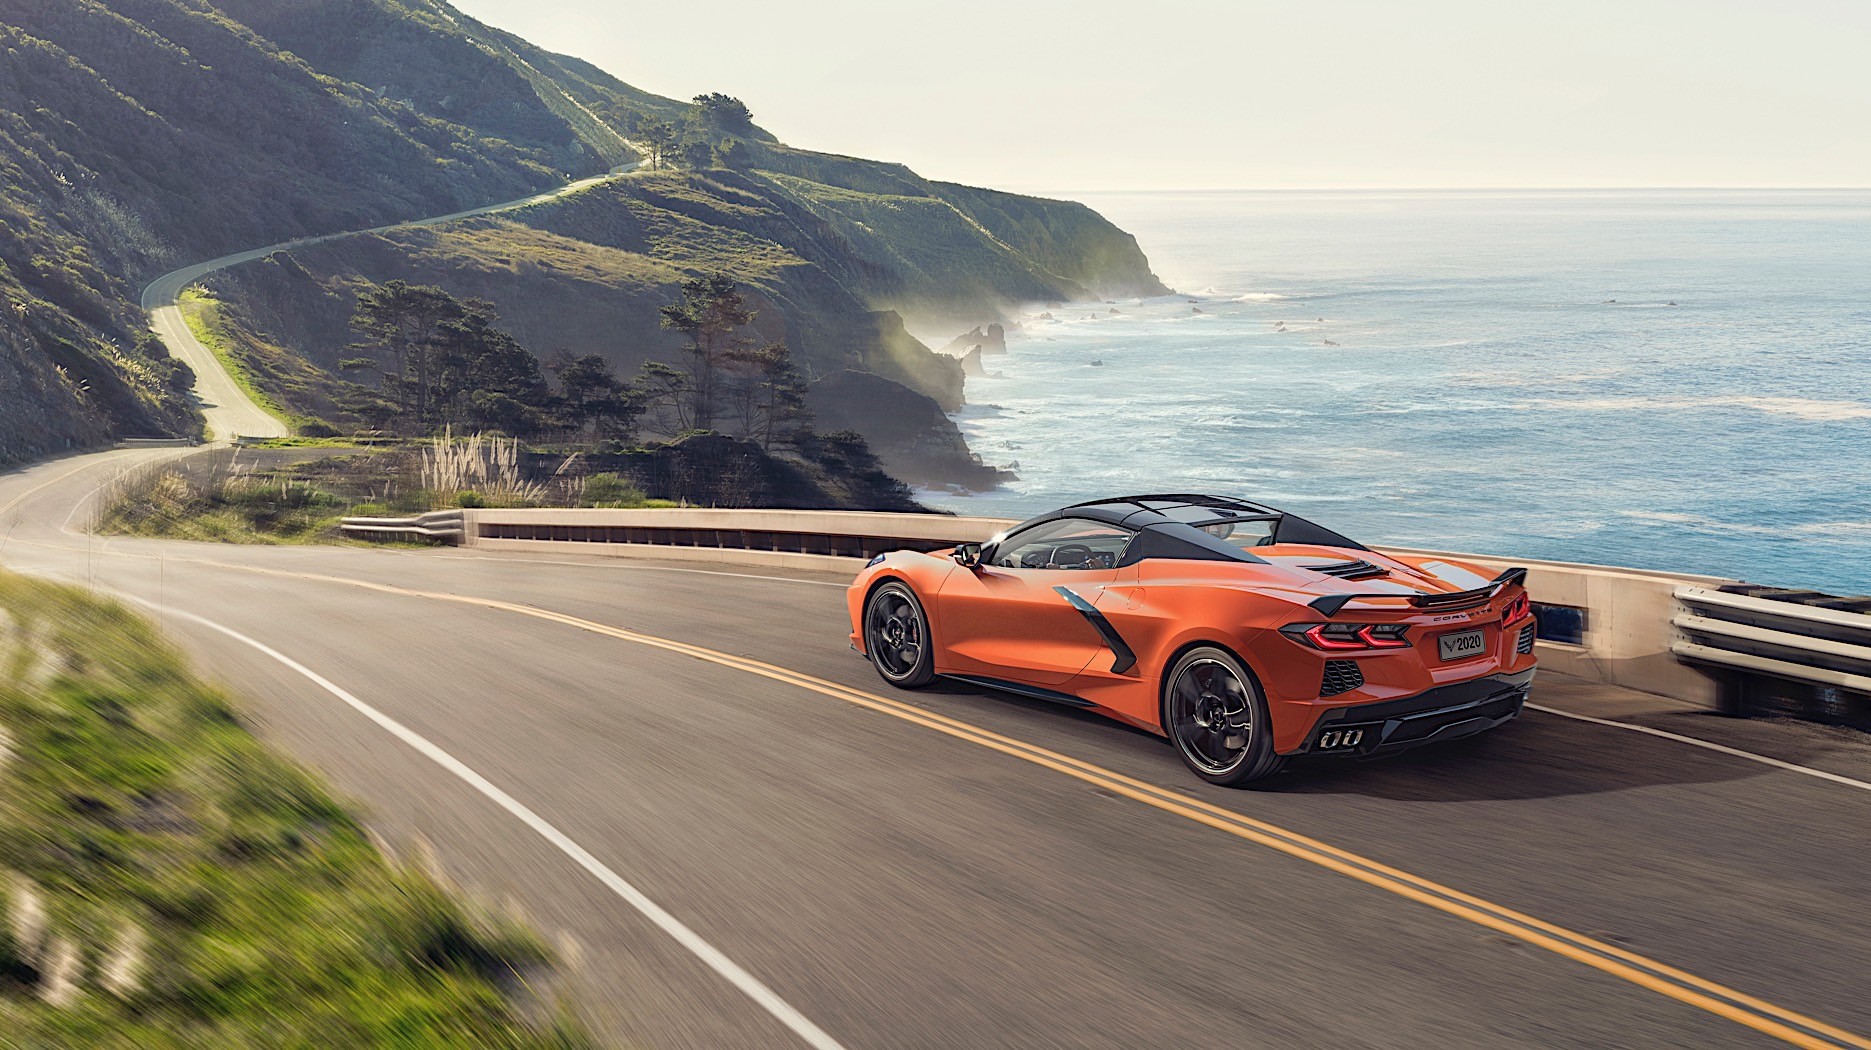 C8 Corvette Transmission Software Problem Will Be Solved by OTA Update